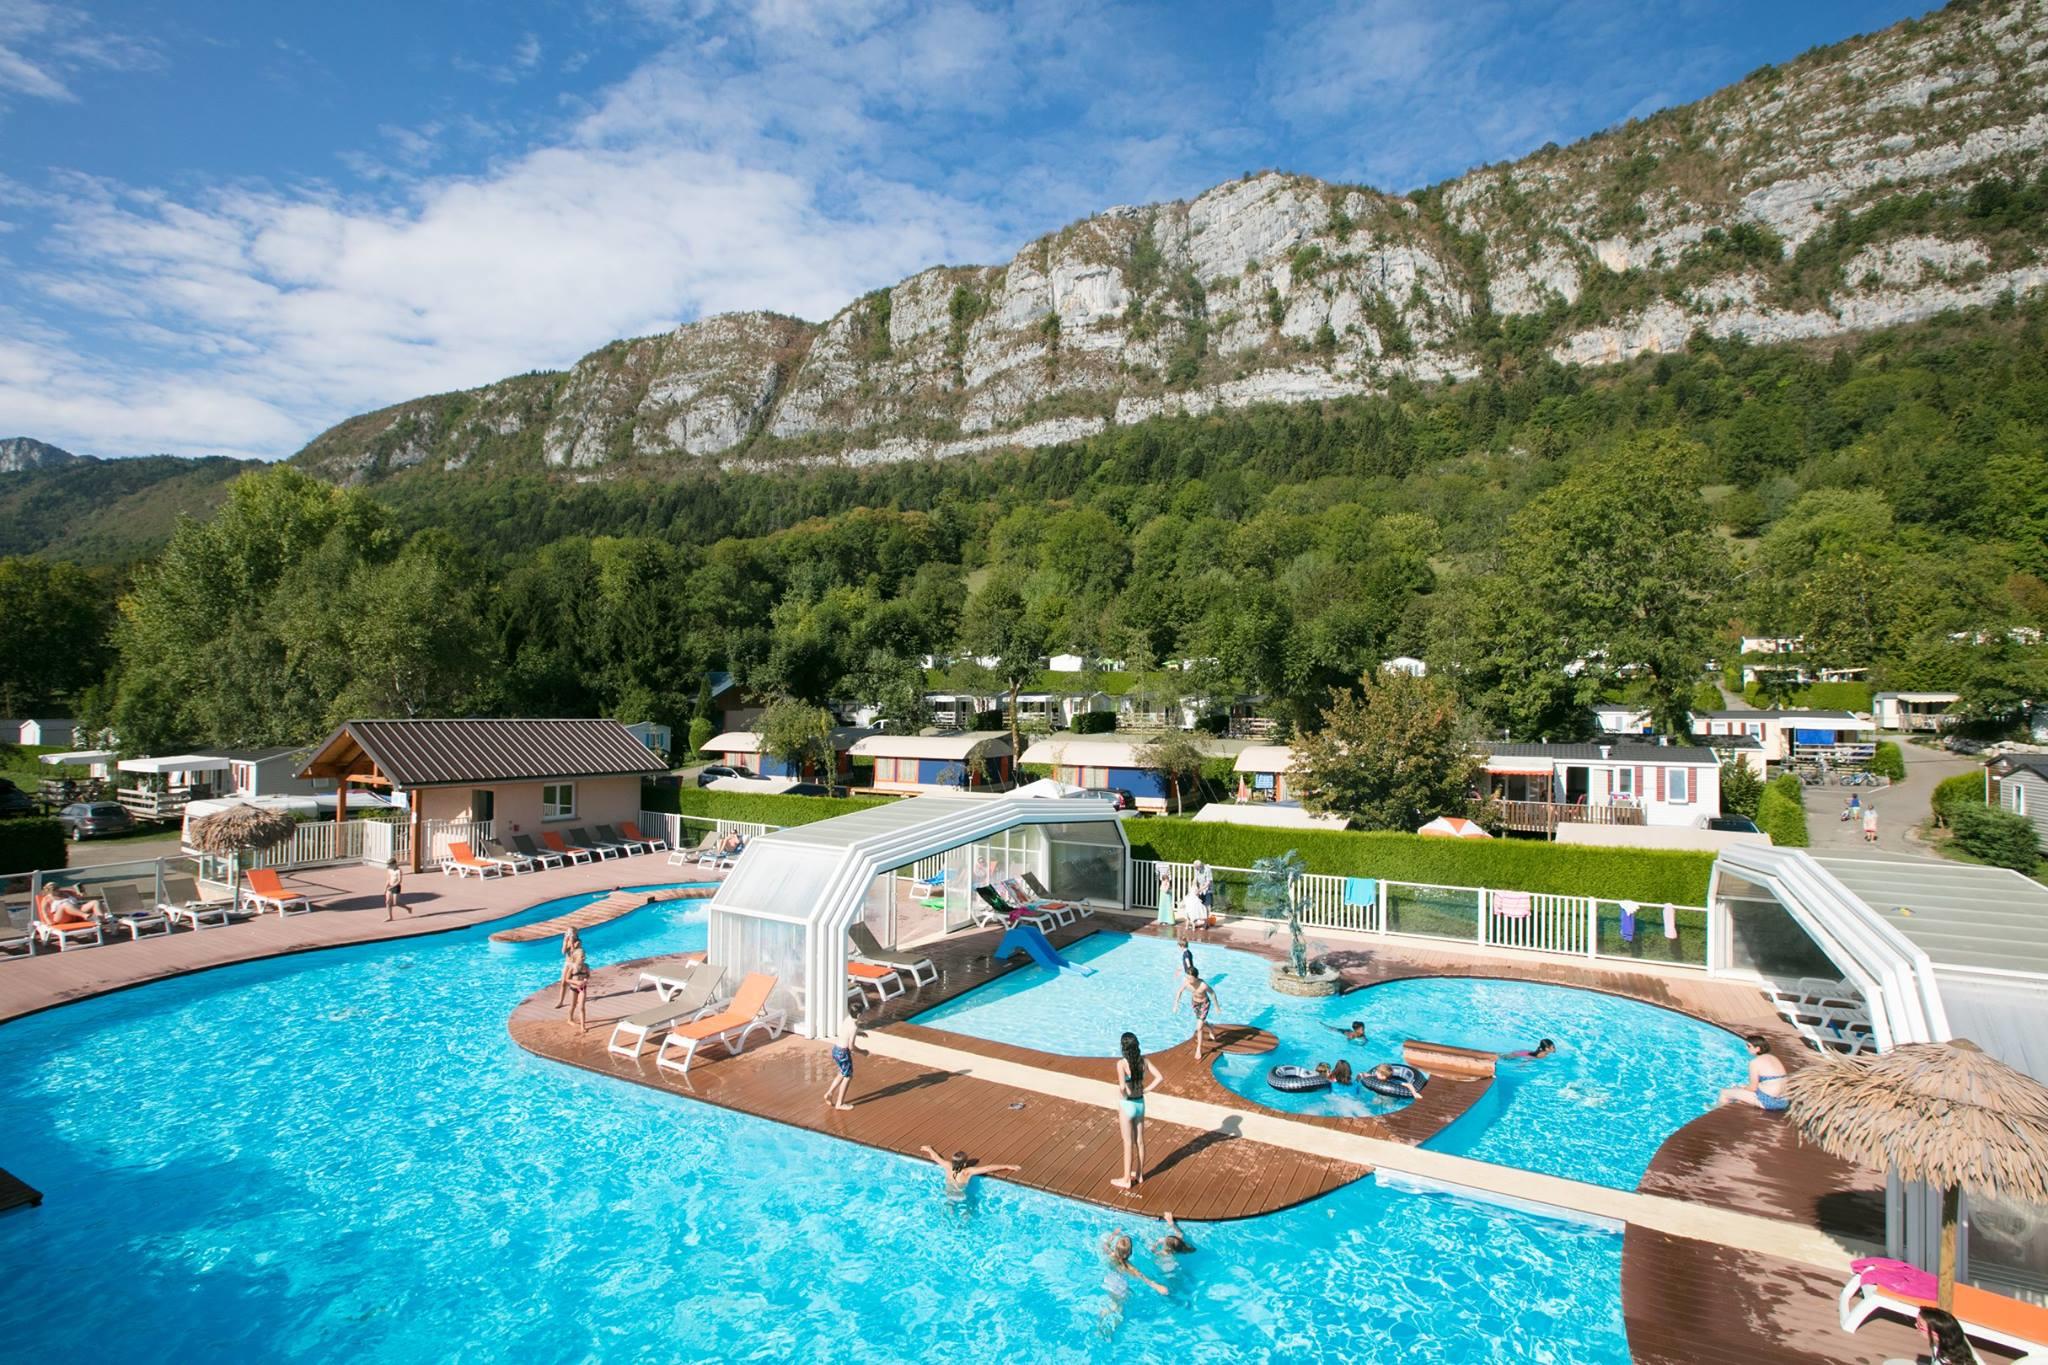  Camping Les Fontaines - Lathuile